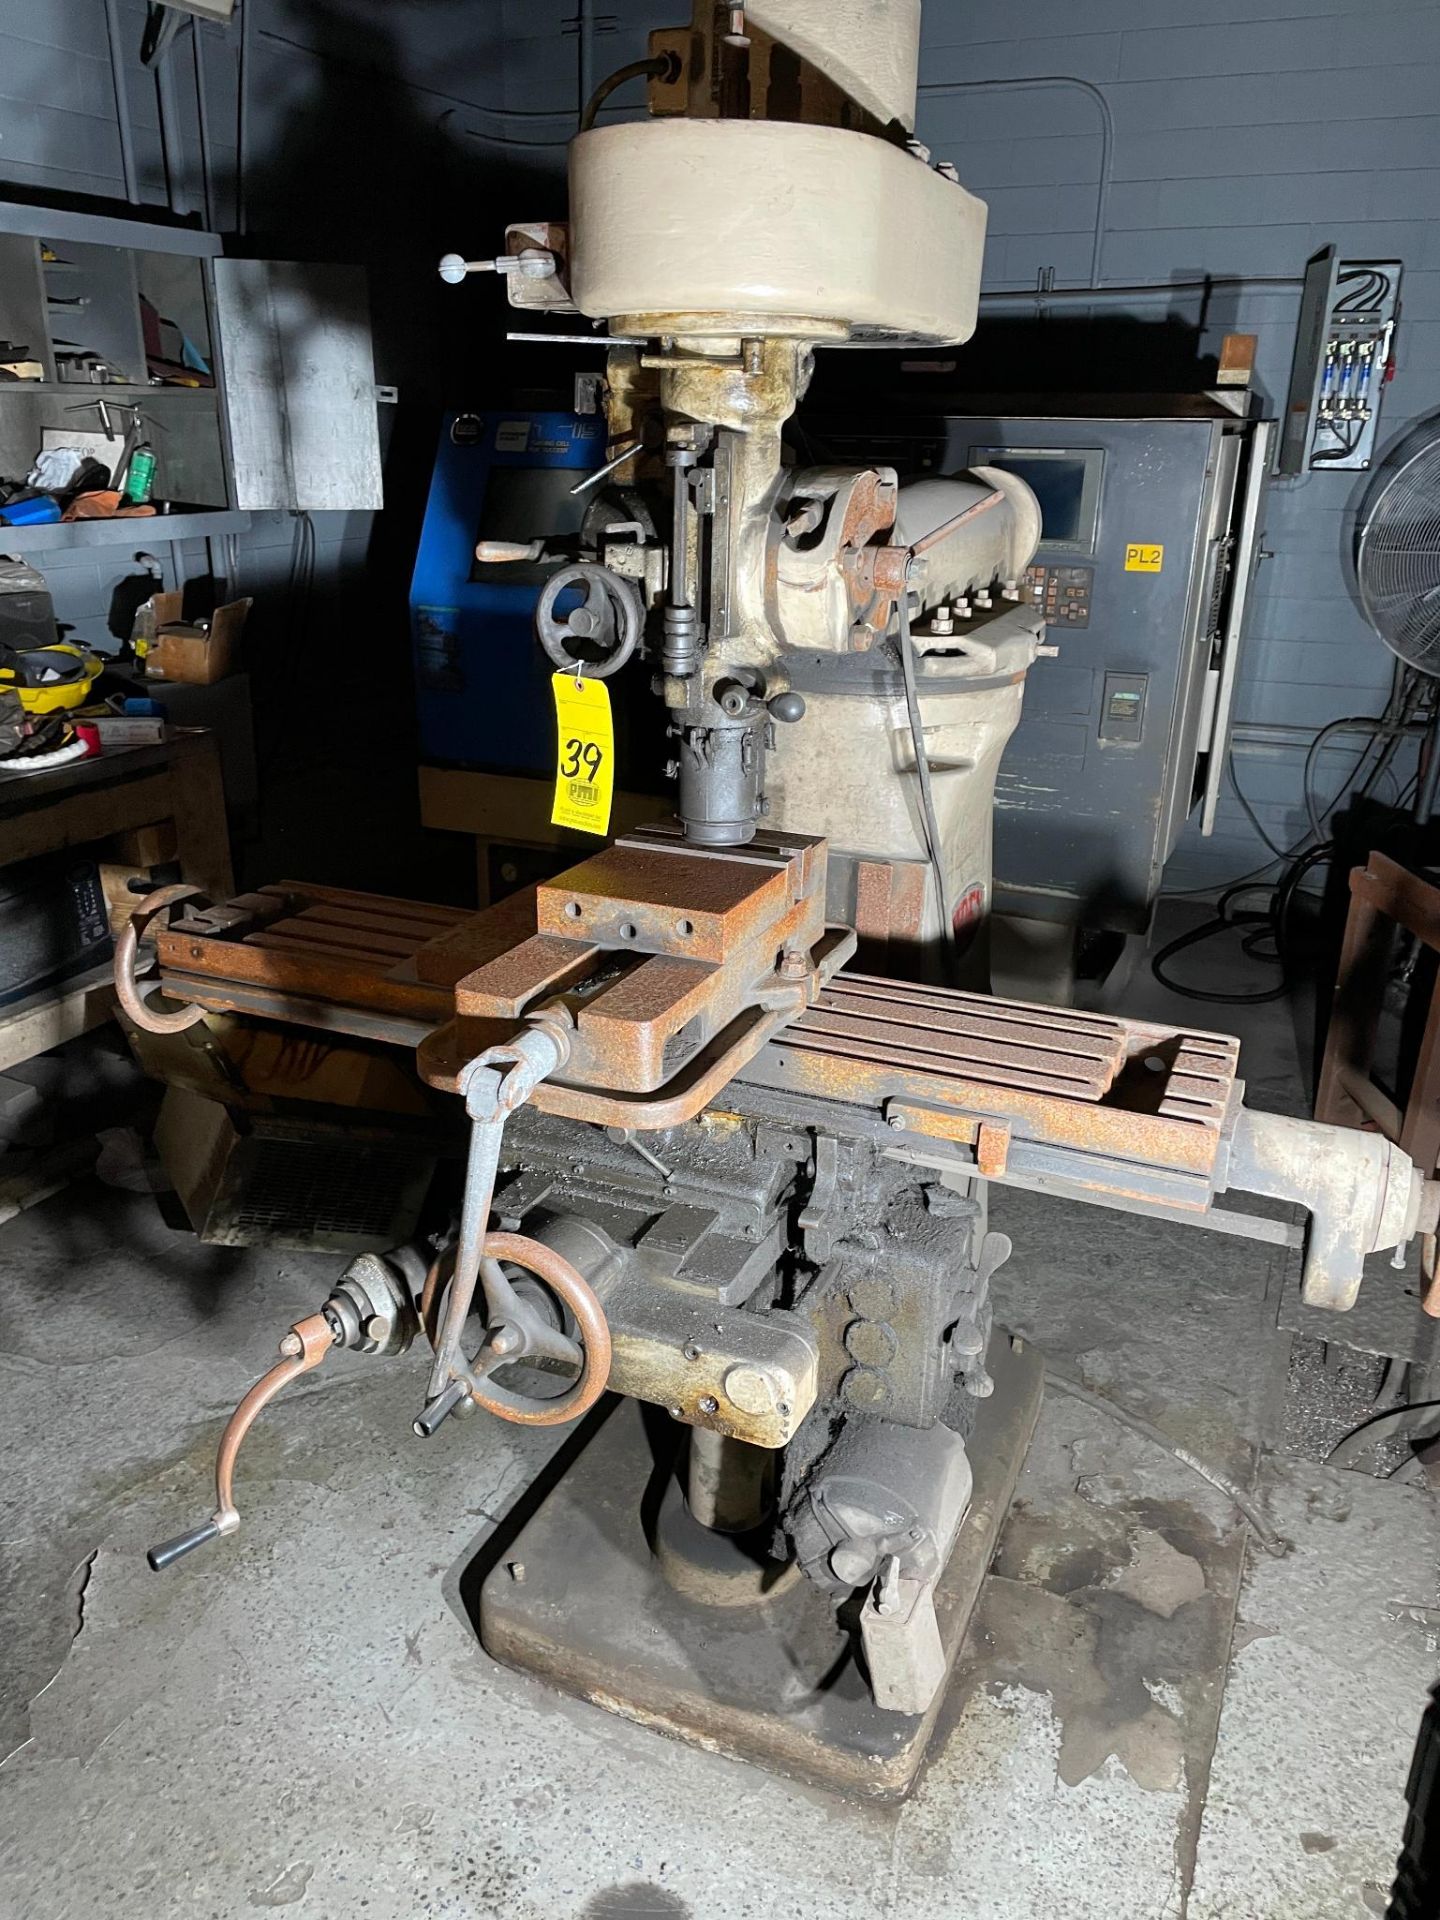 INDEX VERTICAL TURRET MILL, w/ vise, table size approx. 9" 4', 3 Ph, S/N 645-12174